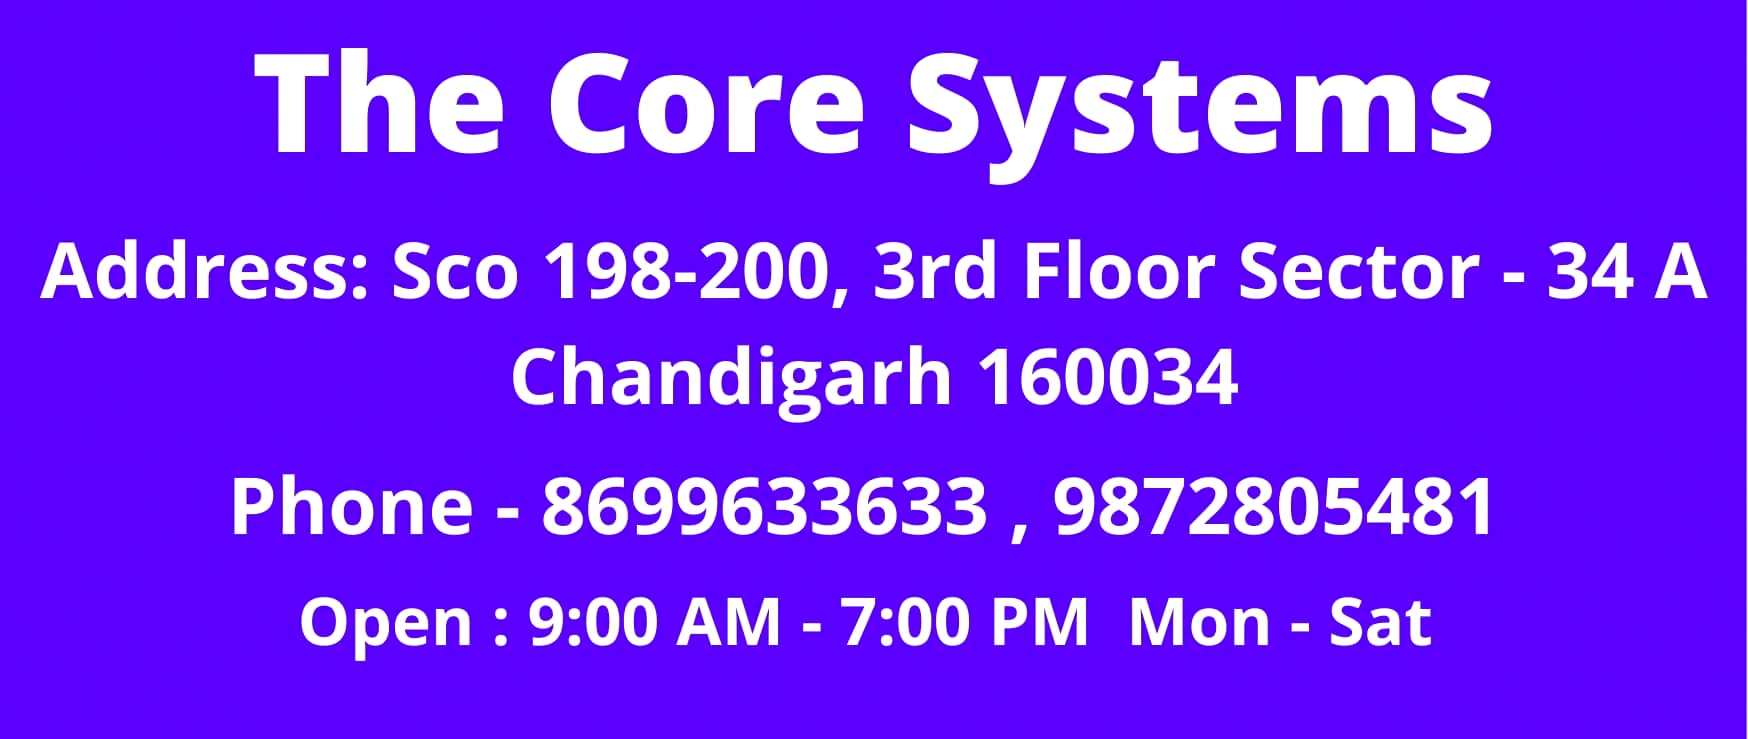 Best C and C++ Training In Chandigarh Mohali  PIC Microcontroller Training in Chandigarh | Mohali | The Core Systems 2 1